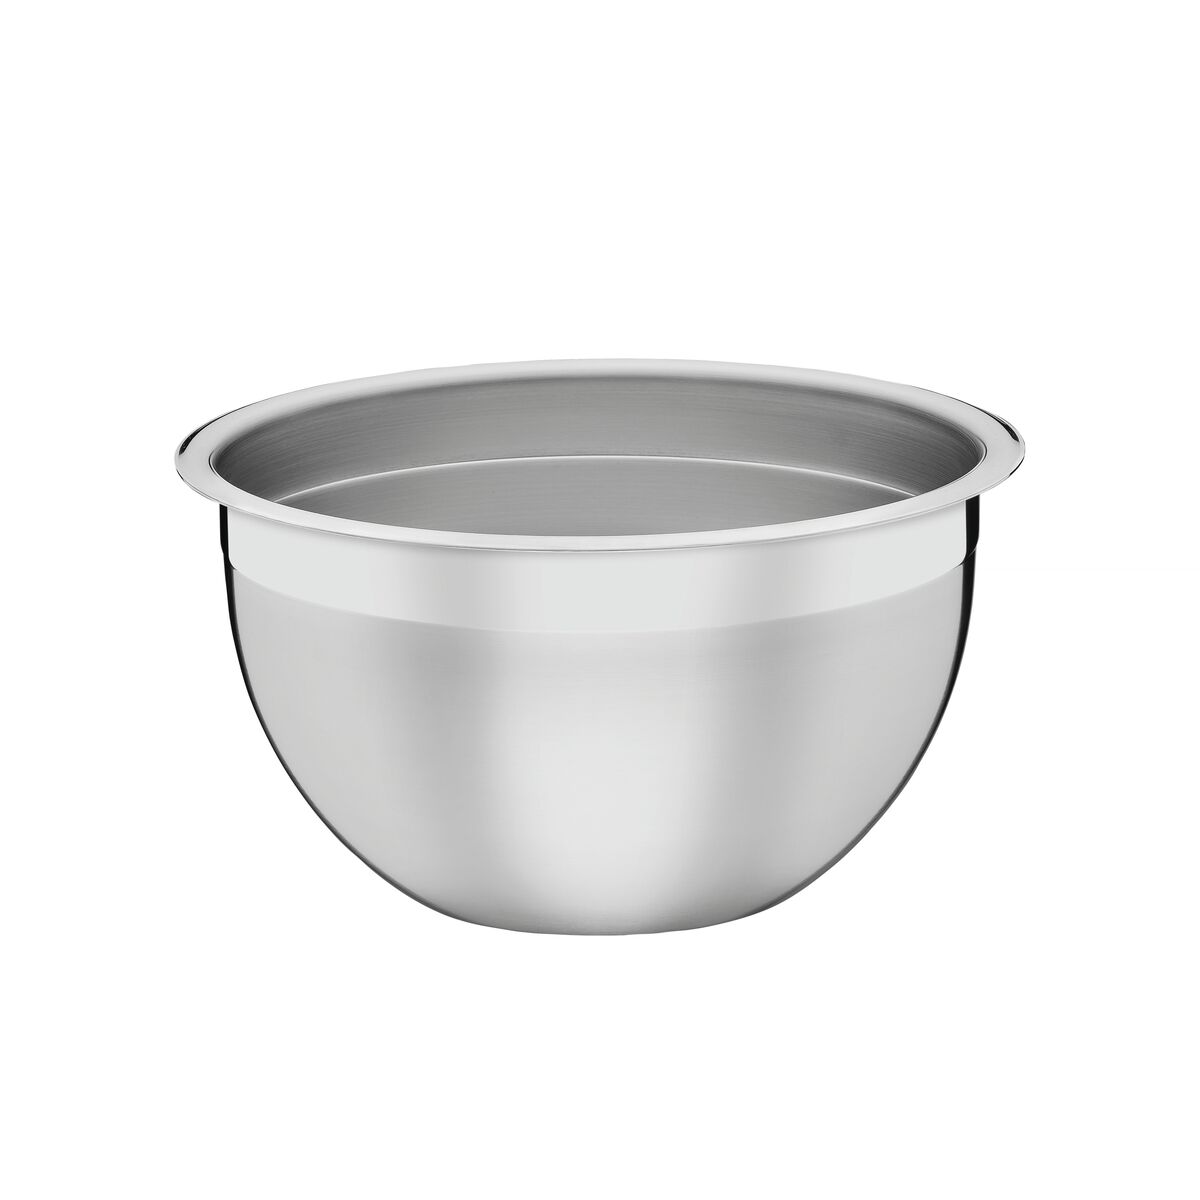 Tramontina Cucina stainless steel container without lid for preparing and serving, 28 cm and 8.3 L